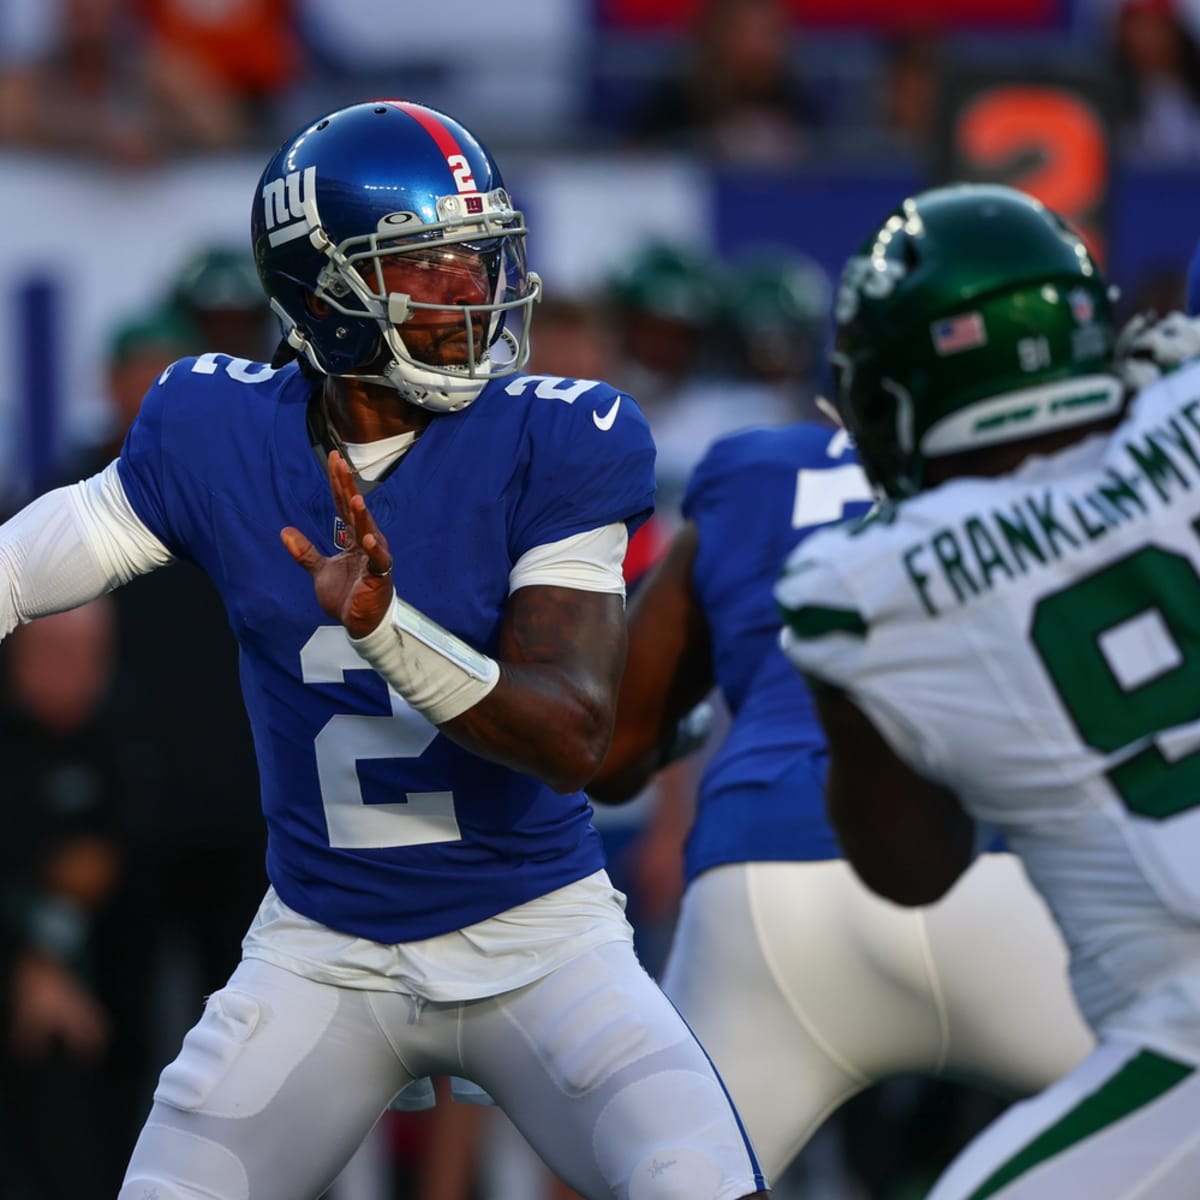 Giants fall to Jets in preseason finale as injuries pile up